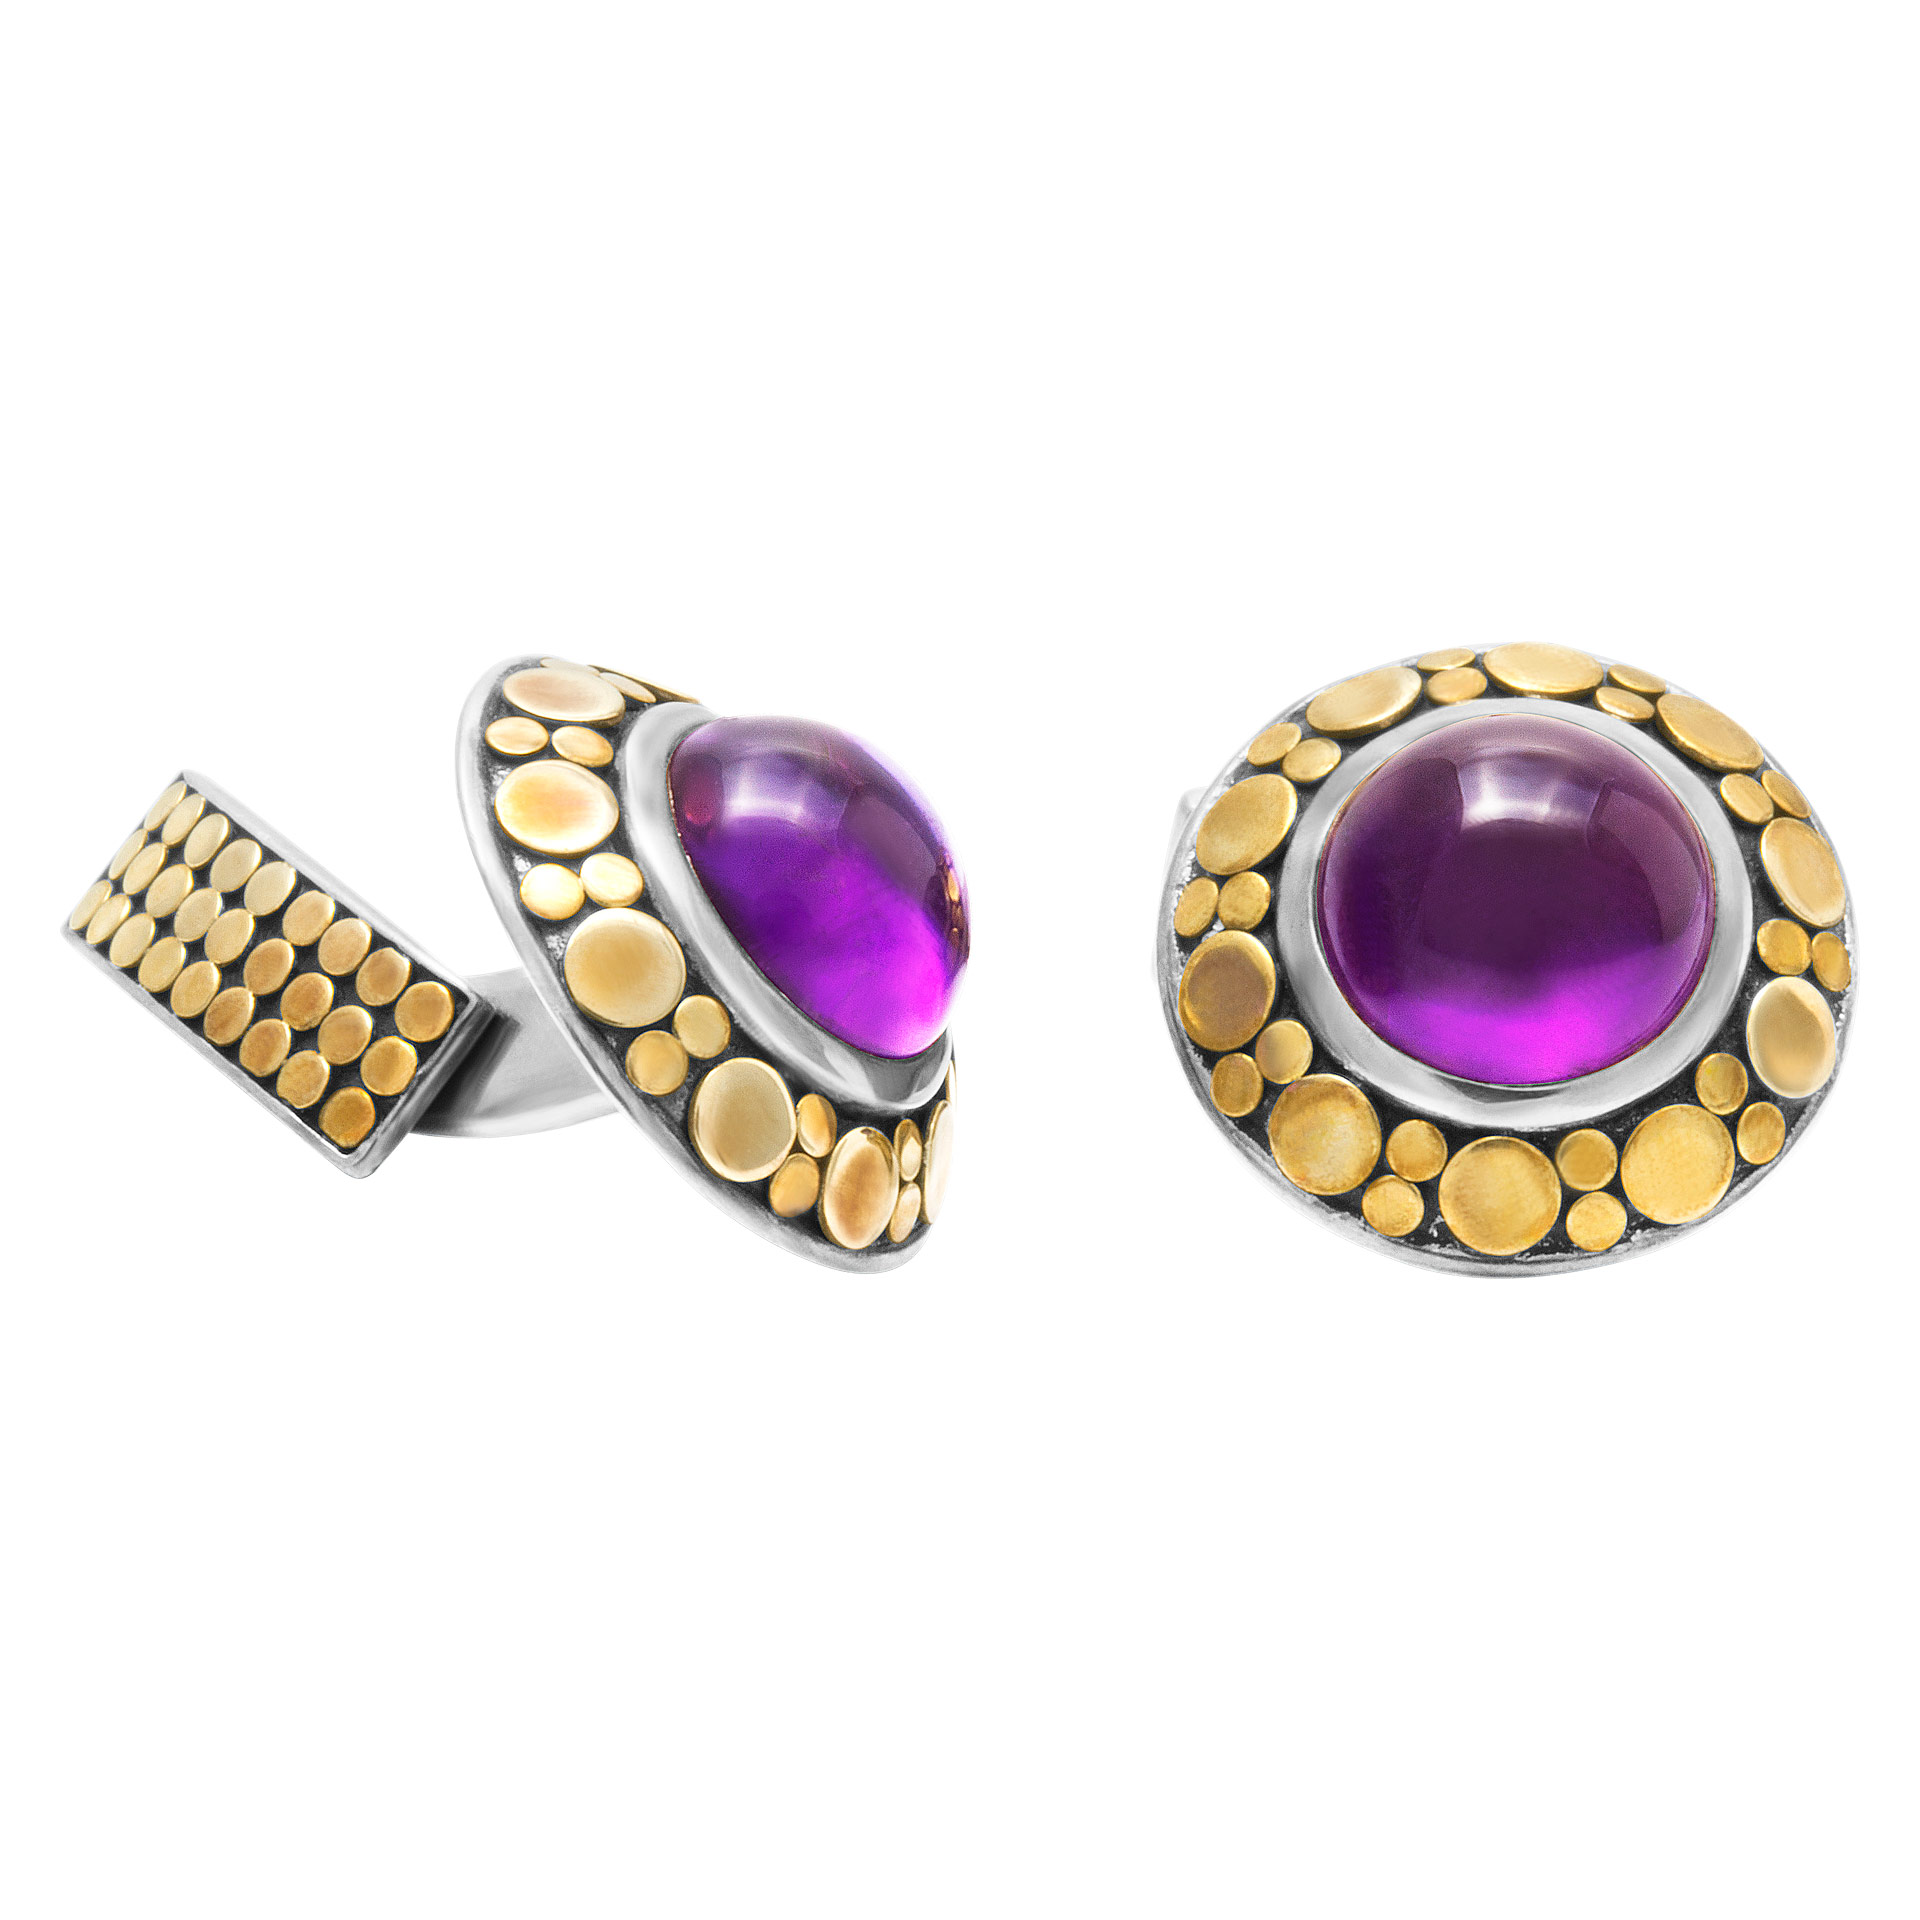 John Hardy cufflinks in 18k yellow gold and sterling silver with Amethyst stone image 1